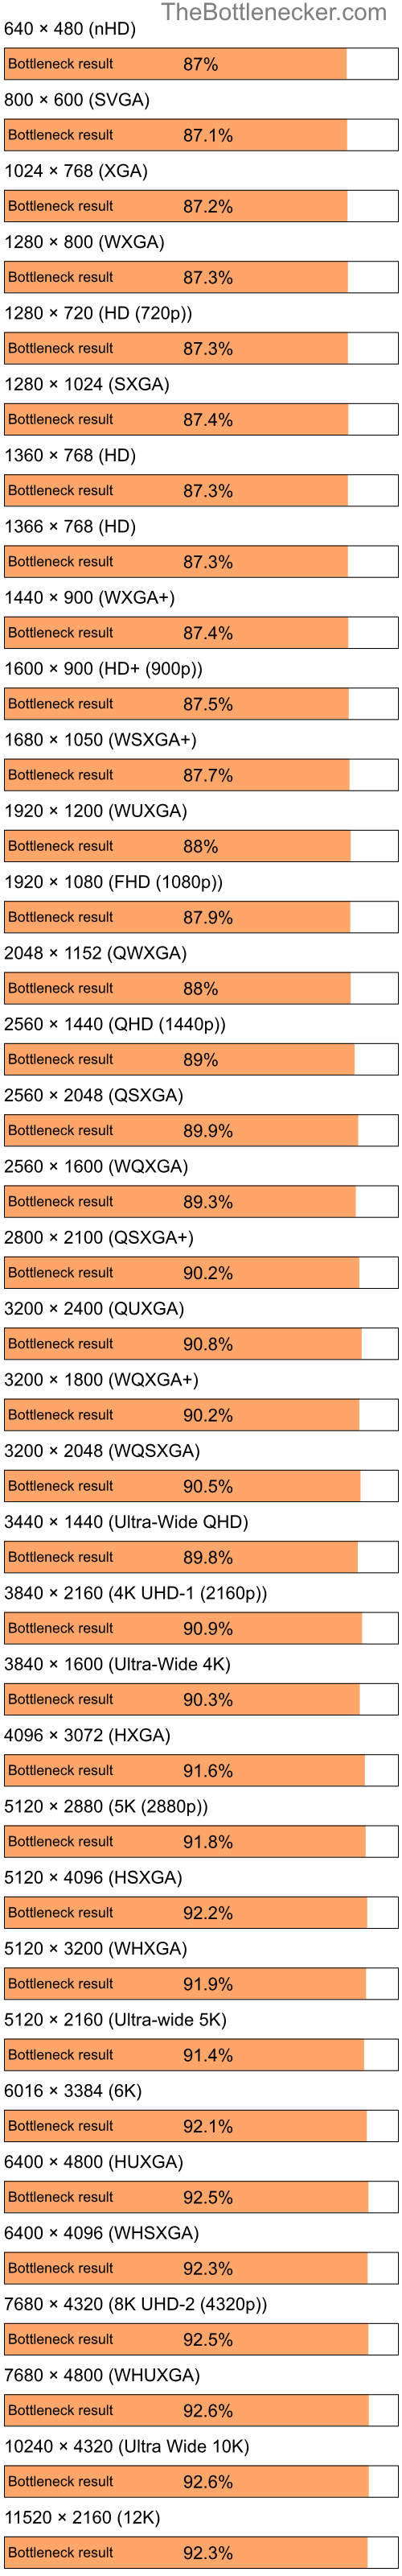 Bottleneck results by resolution for Intel Atom N270 and NVIDIA GeForce4 MX 440 in Processor Intense Tasks